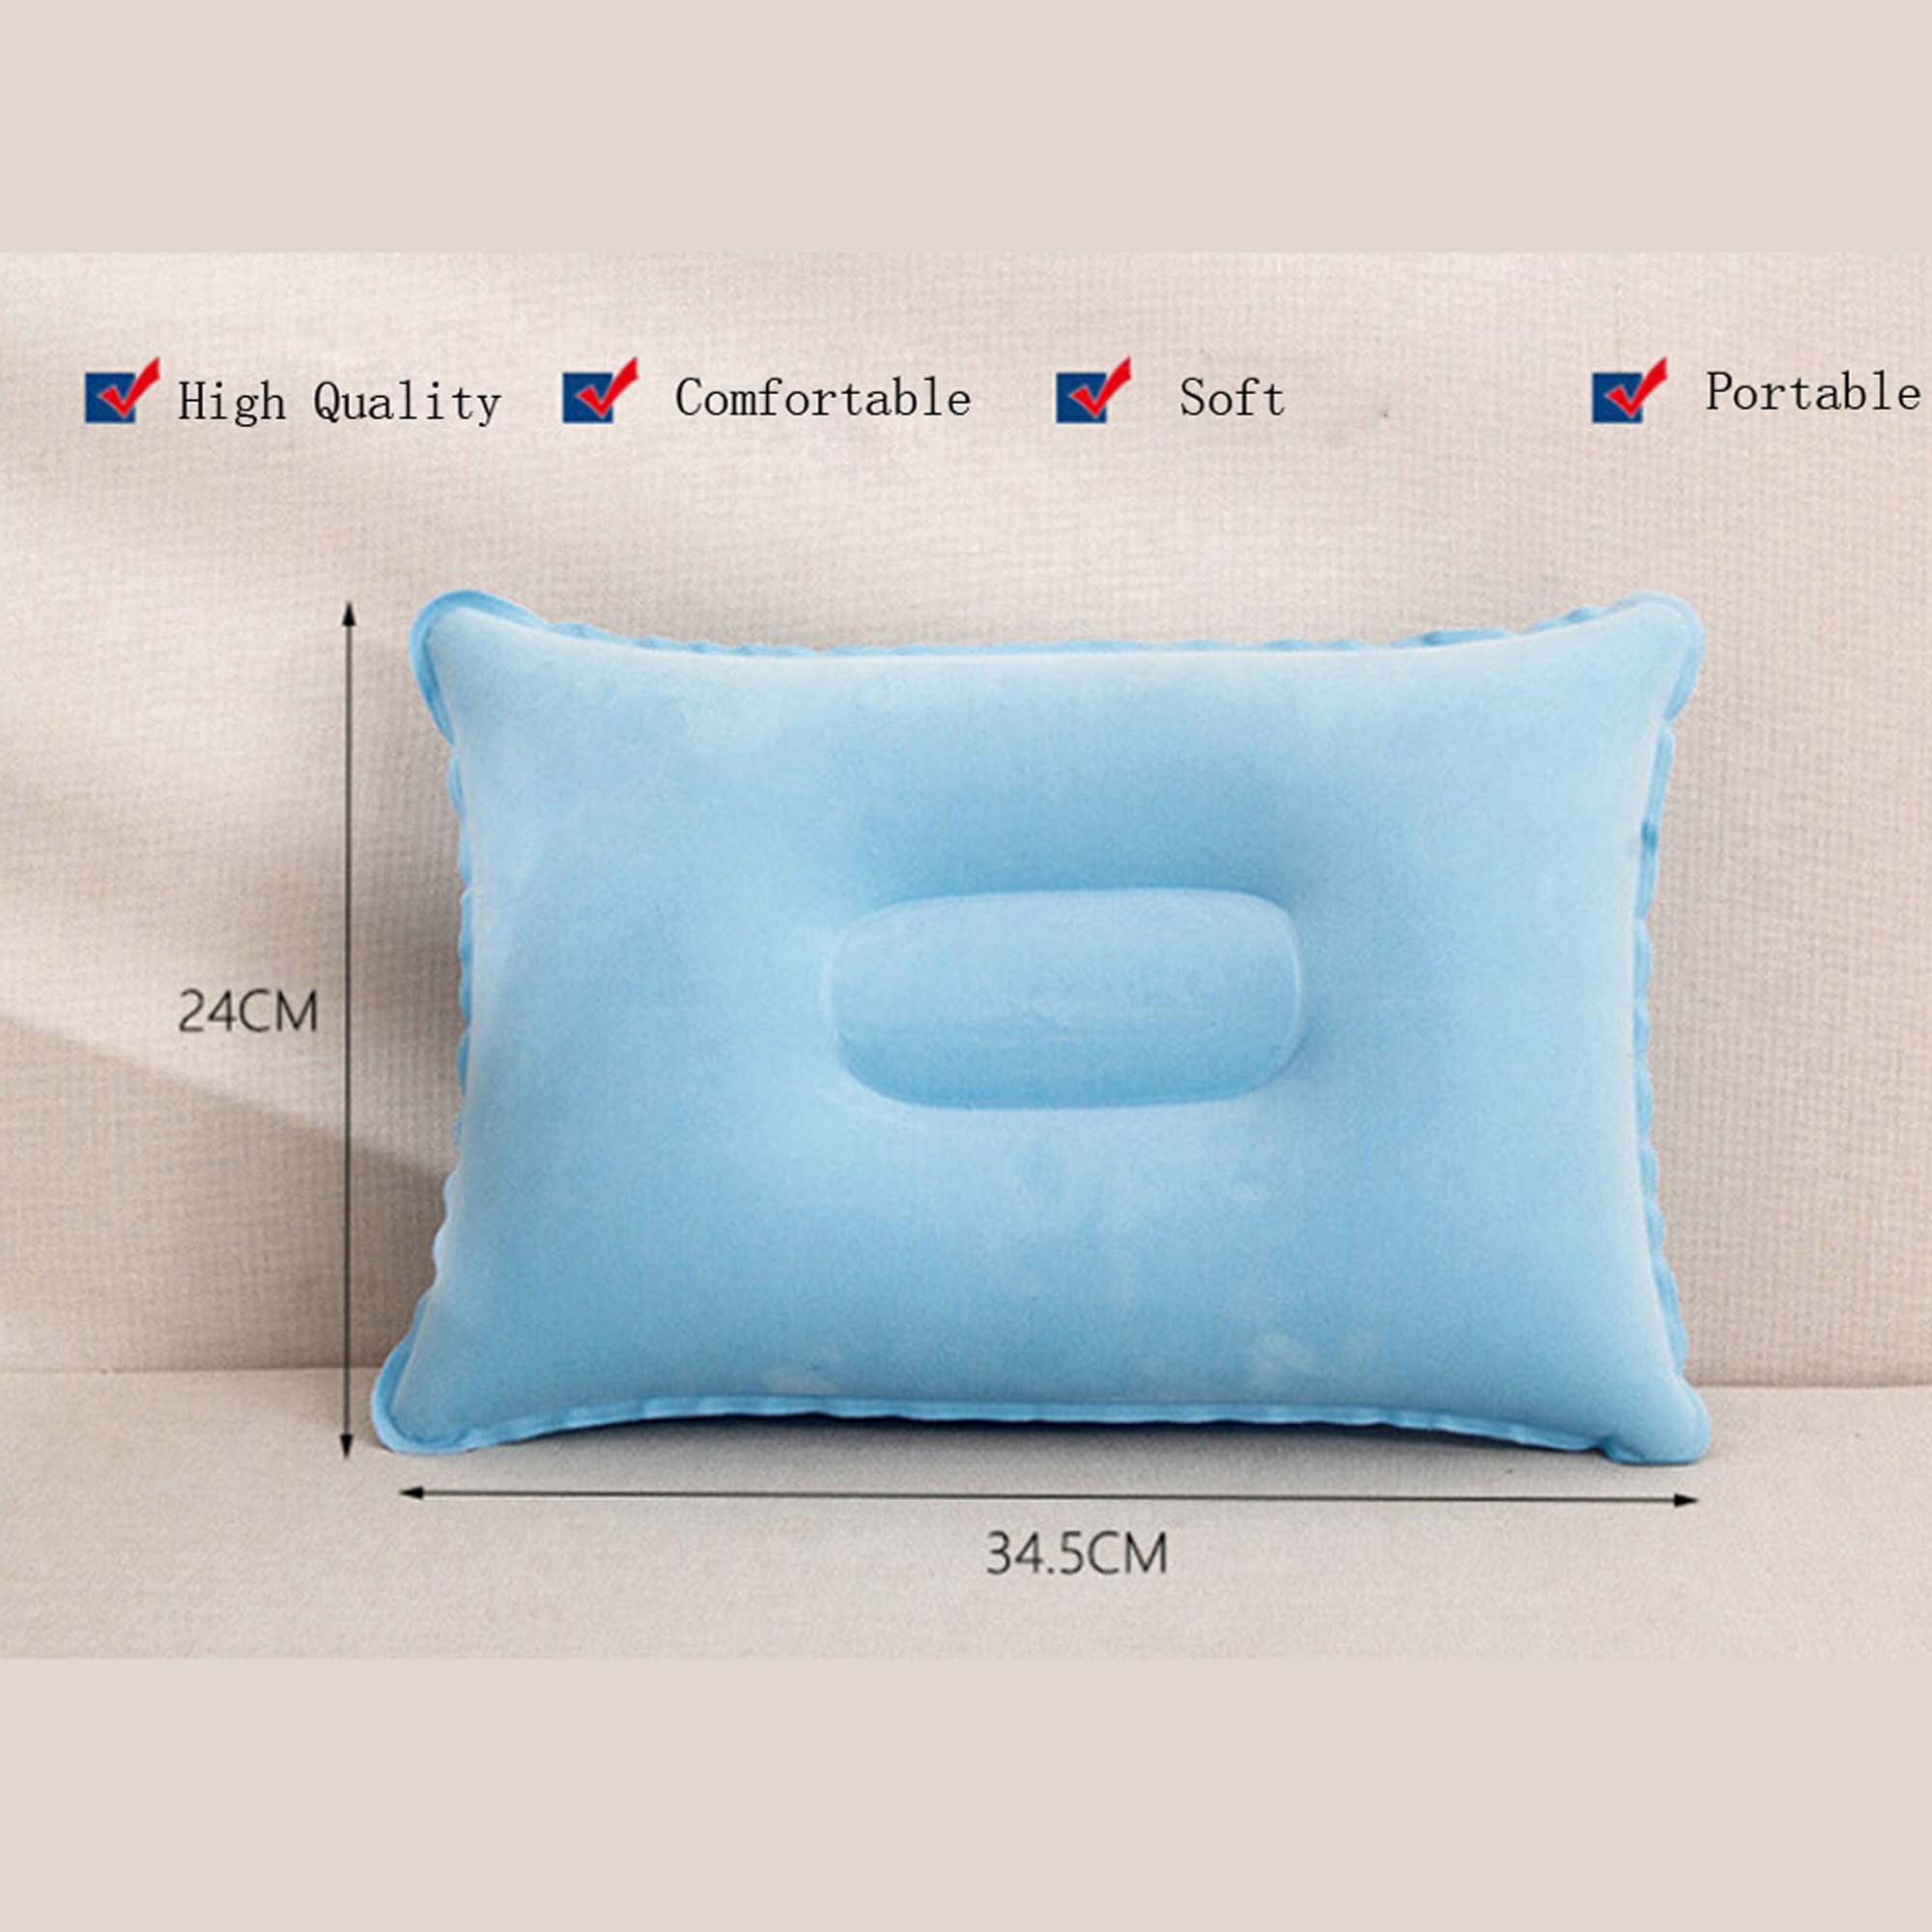 CompactSolutions Inflatable Lumbar Pillow for Airplane Travel - Inflatable  Travel Pillow - Inflatable Back Pillow - Inflatable Lumbar Support - self